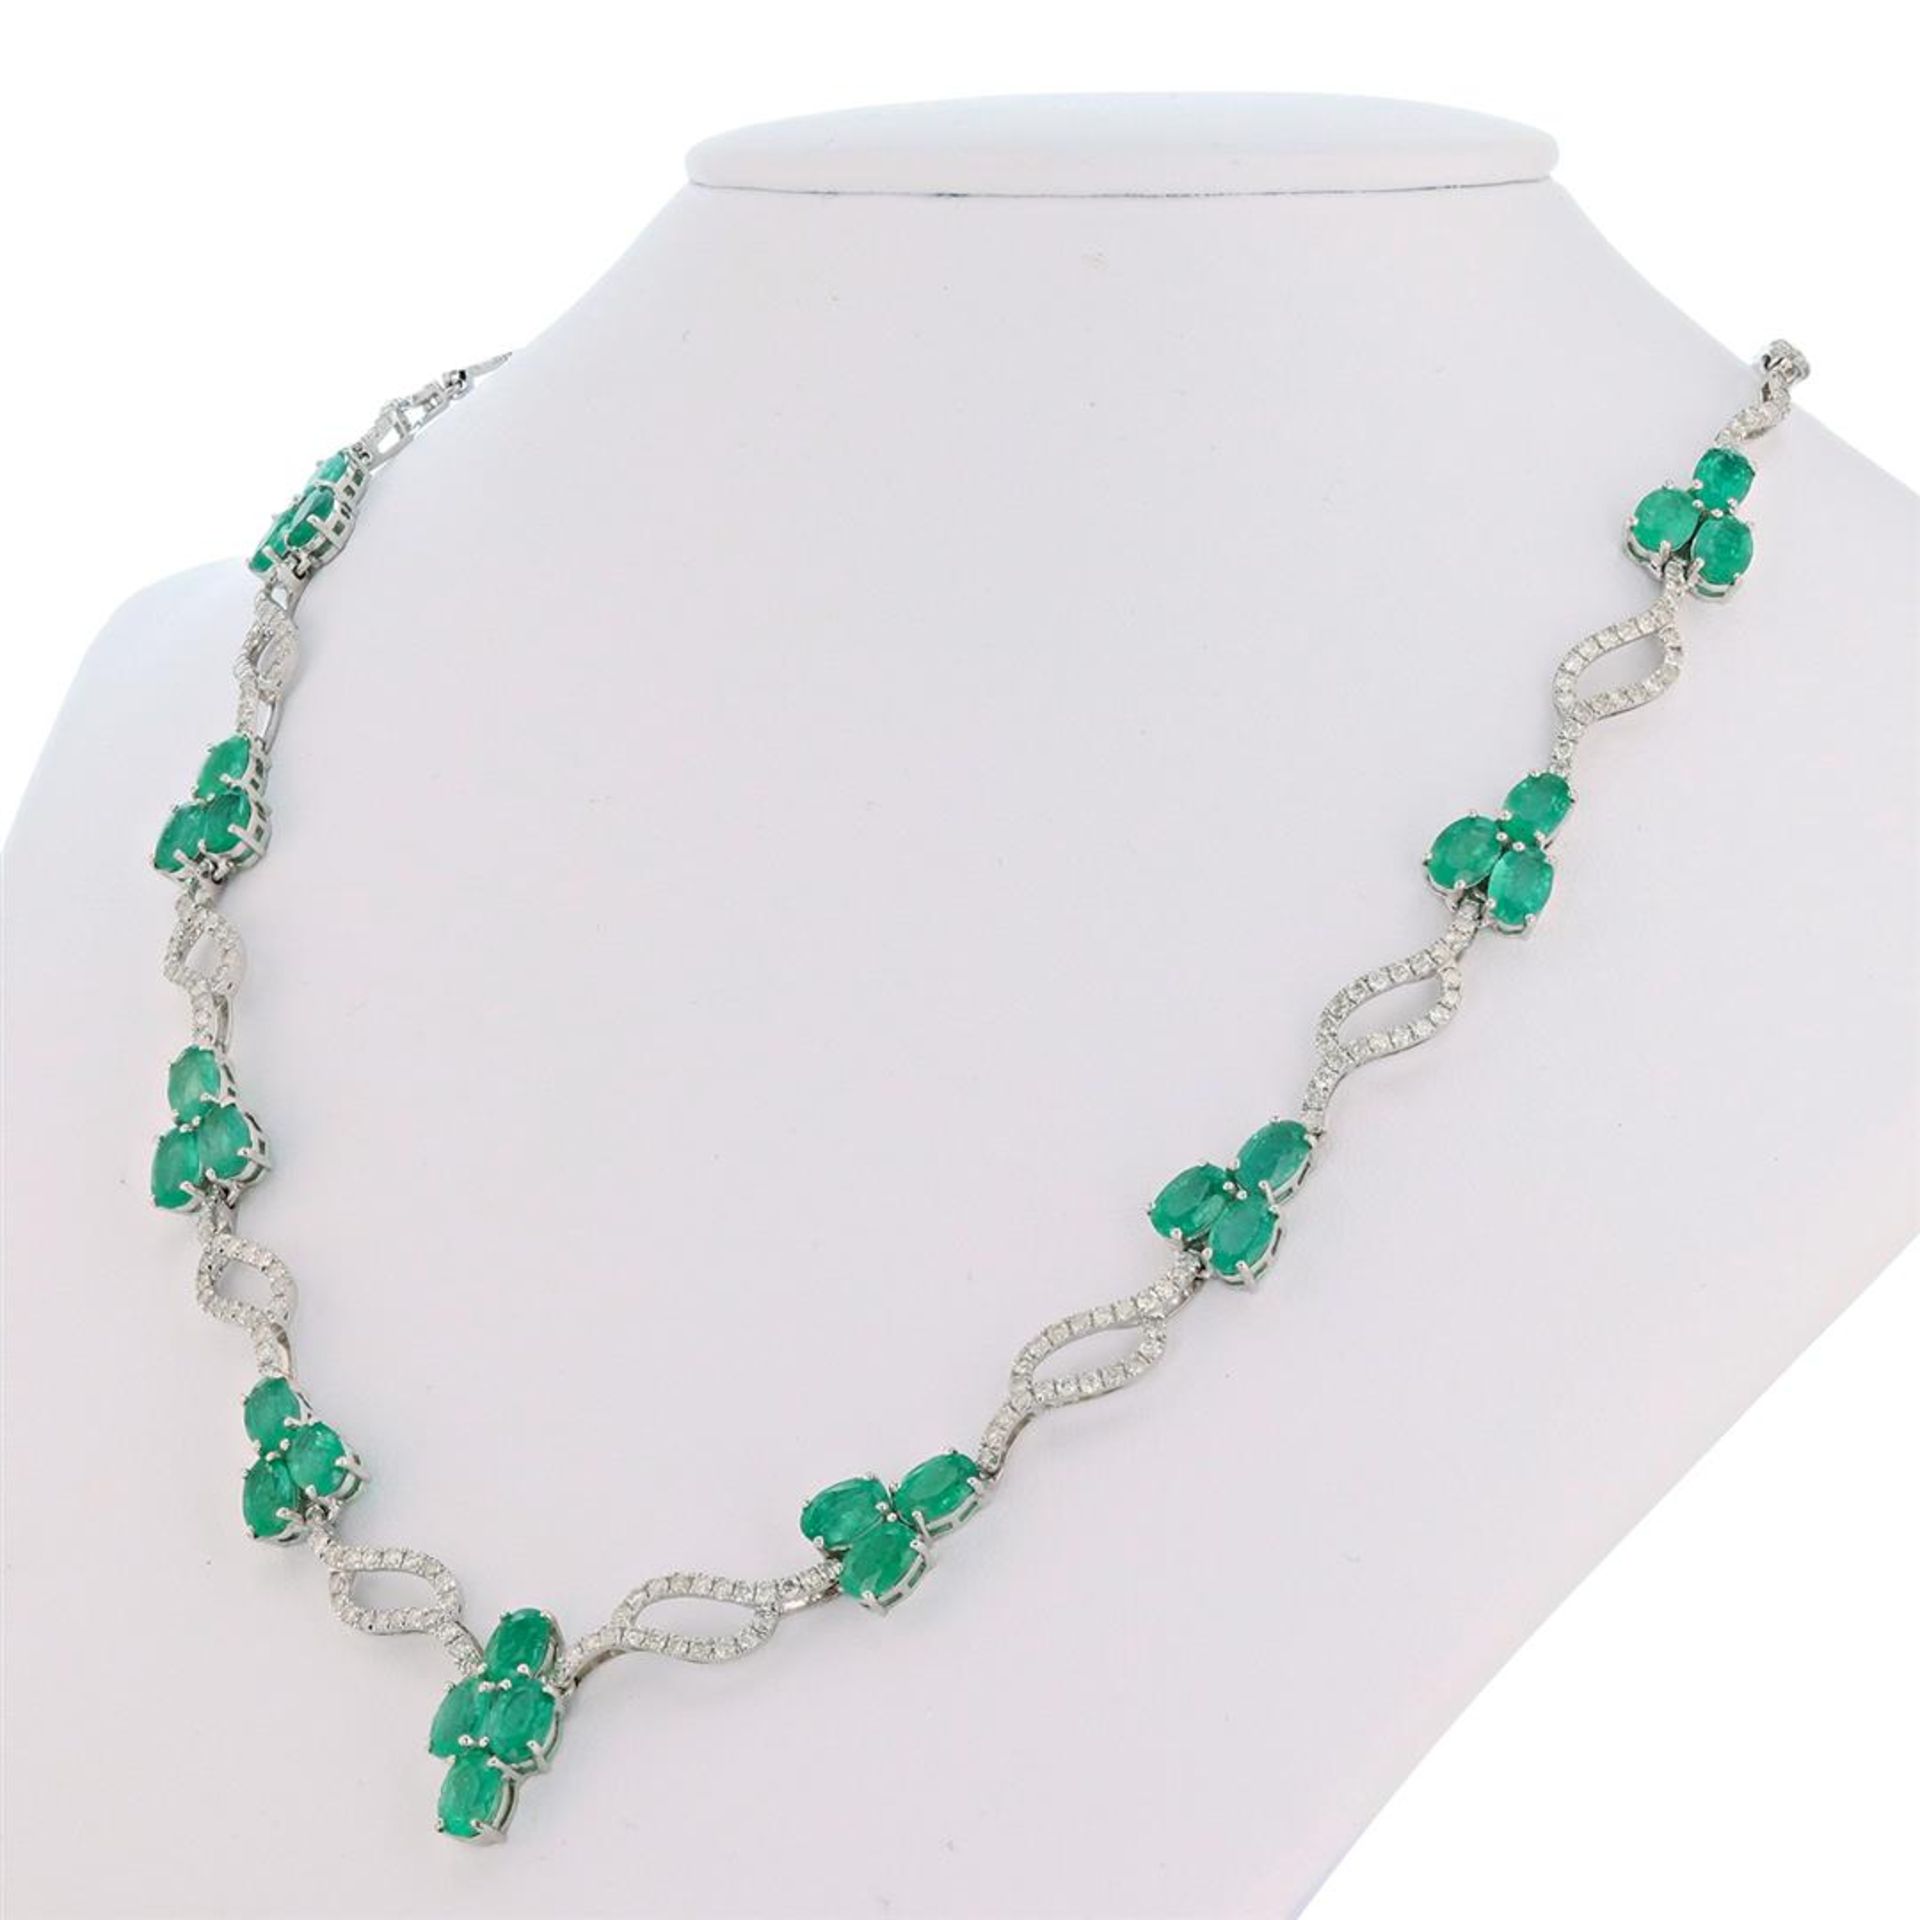 11.92 ctw Emerald and 3.64 ctw Diamond 18K White Gold Necklace - Image 2 of 4